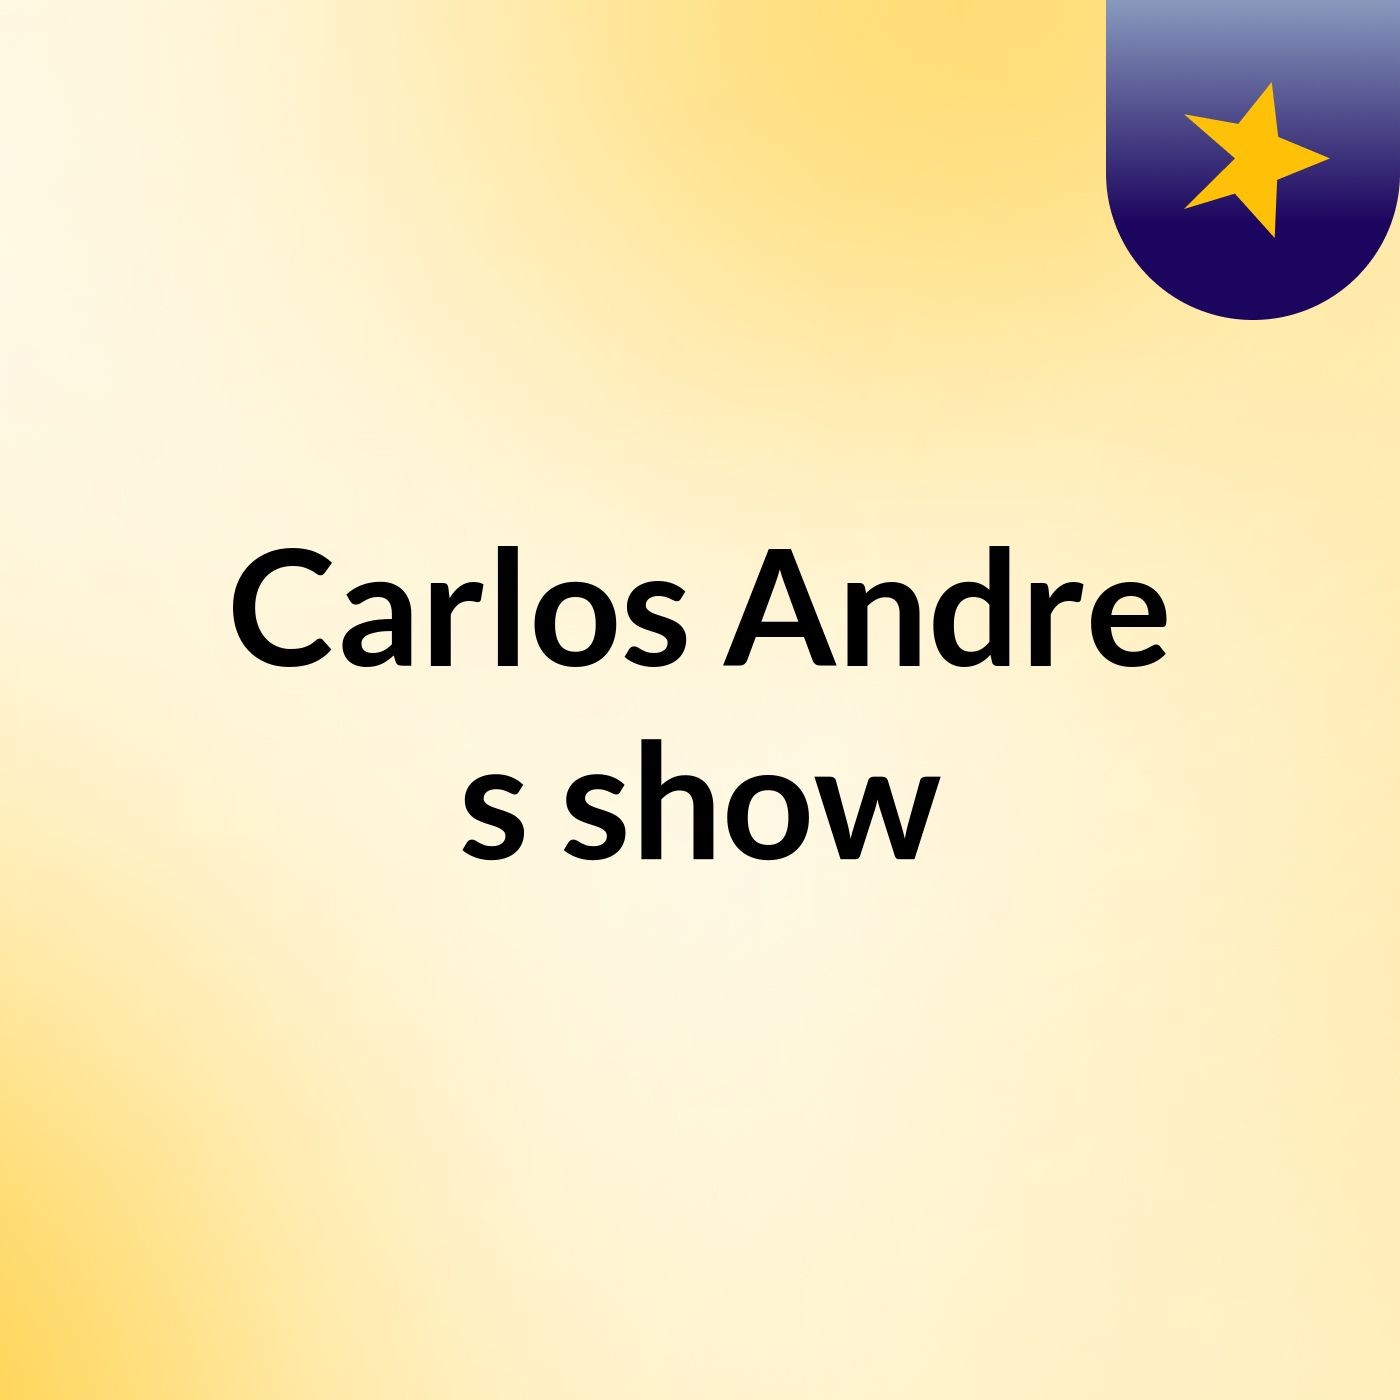 Carlos Andre's show